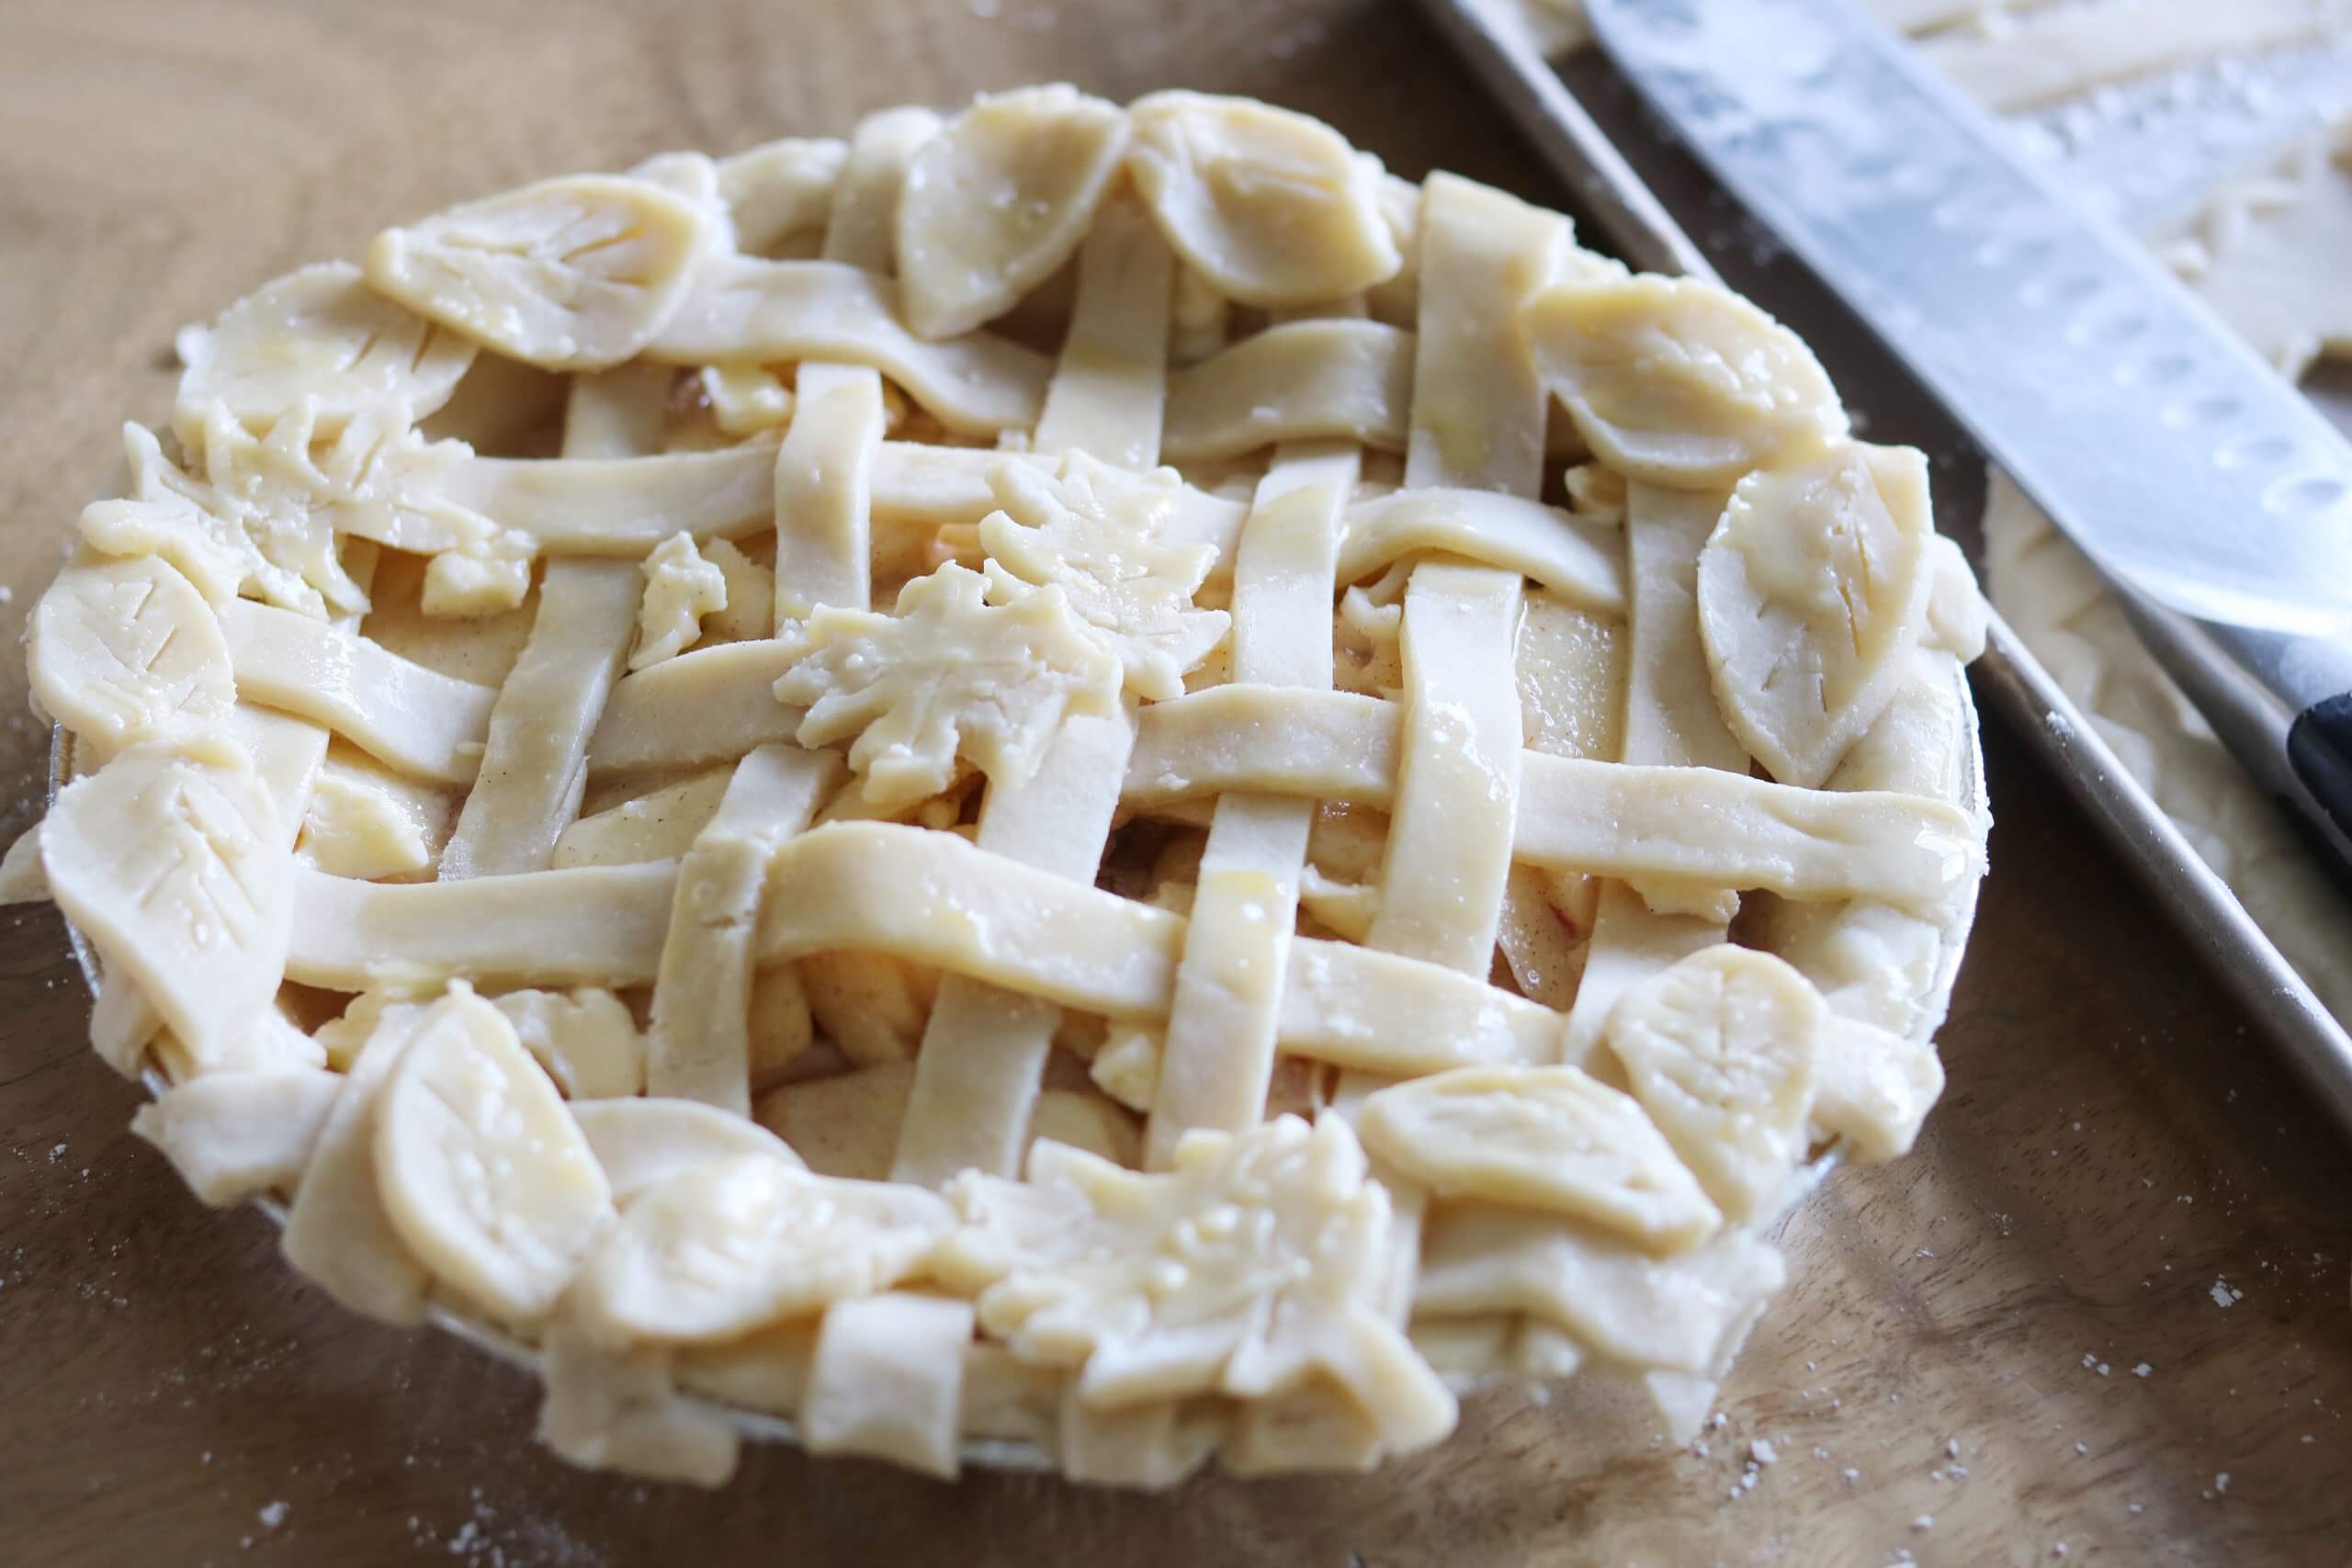 Apple Pie Cheat Recipe!  Quick and easy apple pie with a pretty crust design